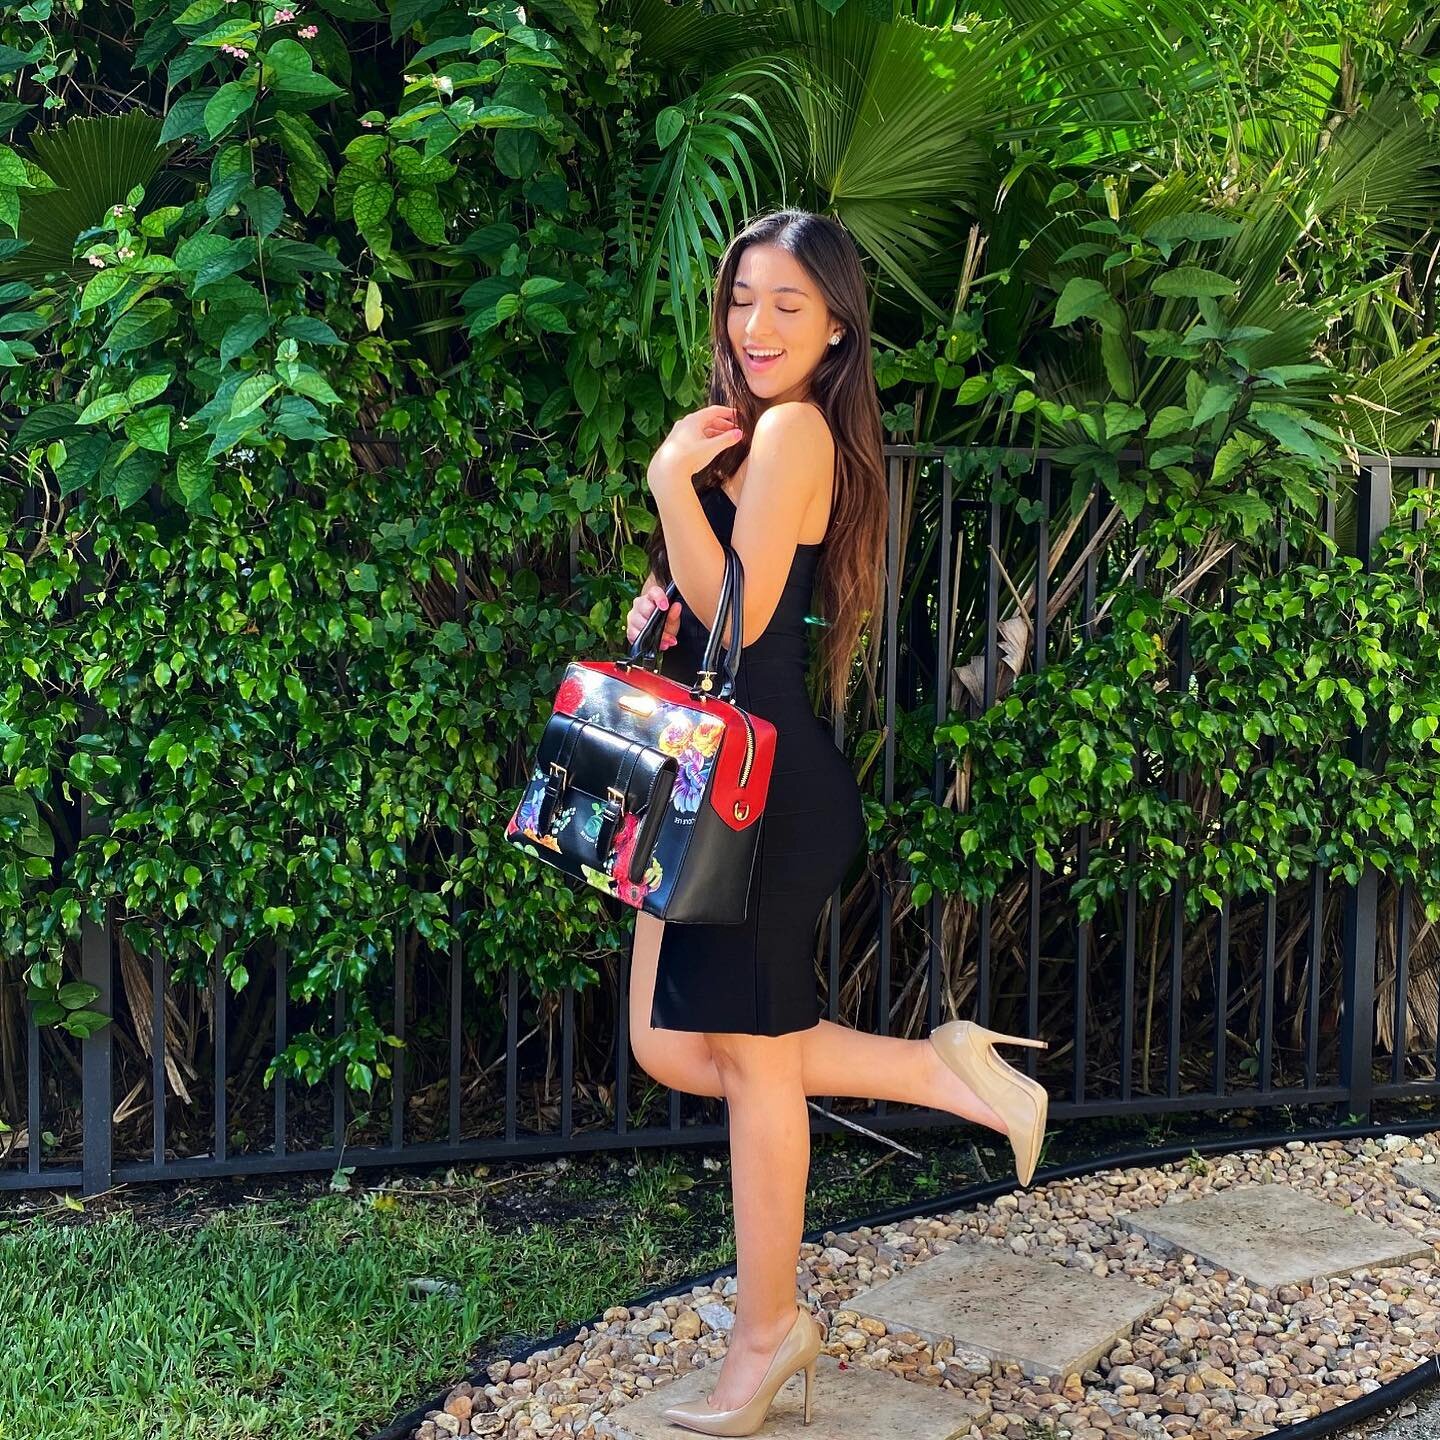 The chic fashion &ldquo;Beauty in the Dark&rdquo; Floral Tote Bag is perfect to take to work everyday and still be stylish!🌺👩🏻&zwj;💻👜 Tap the picture to see prices or visit the link in our official website to shop our new arrivals!

📸 credit: @